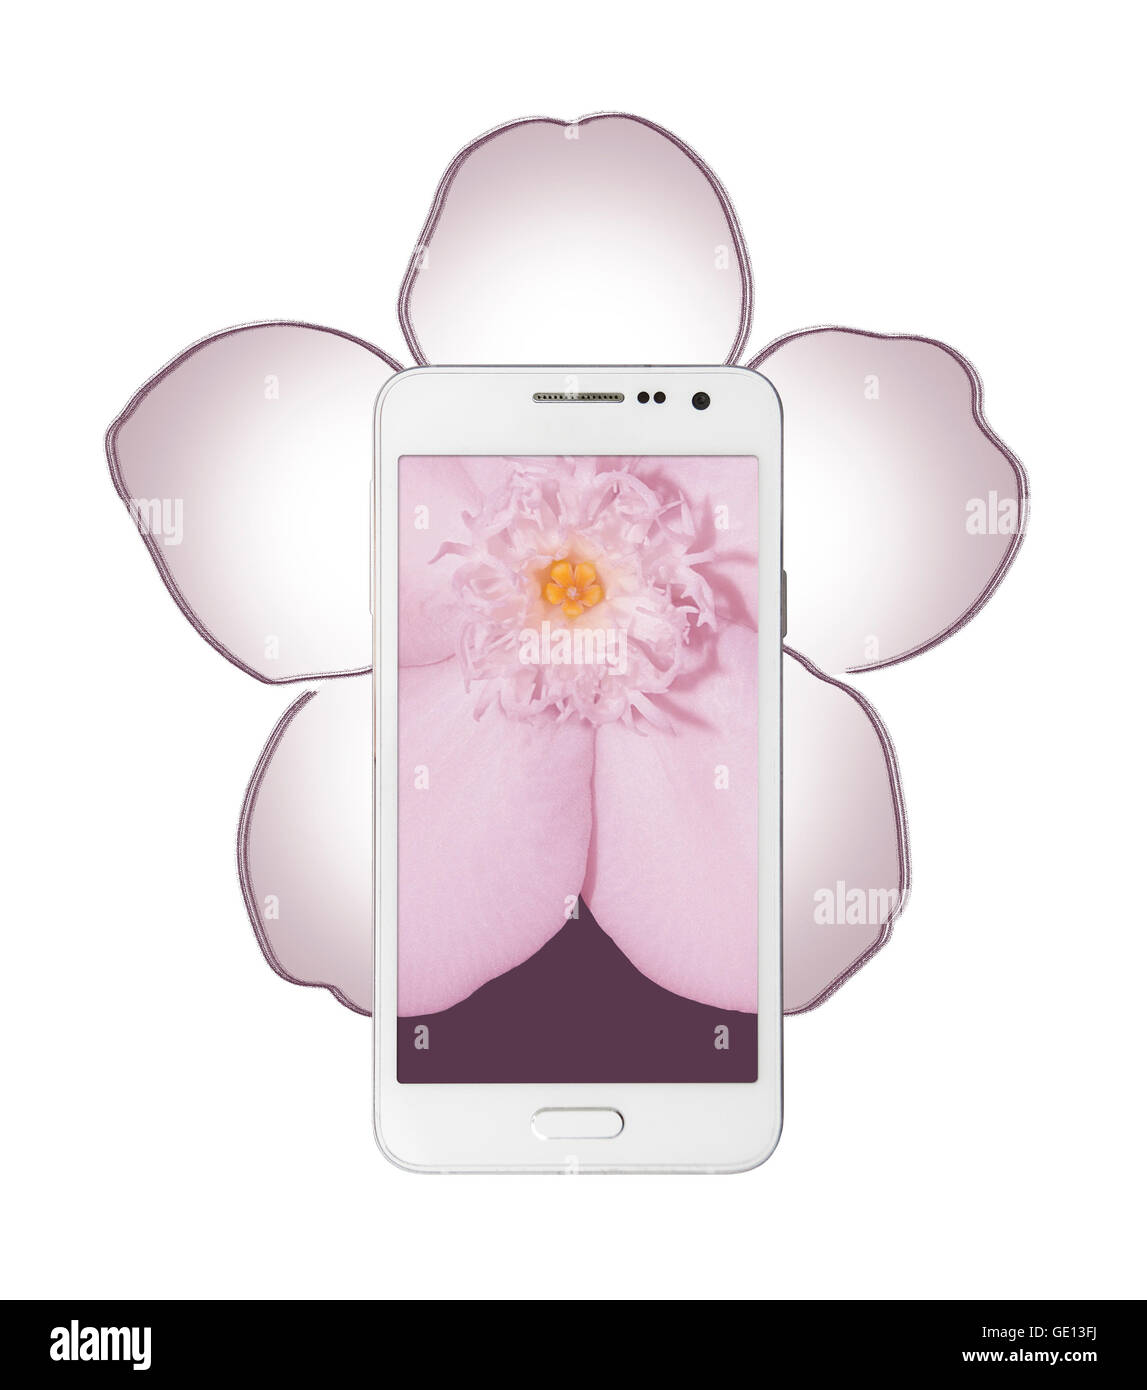 a portion of a flower shown on a smart phone screen and it's missing parts extend outside the phone in as a drawing. Stock Photo